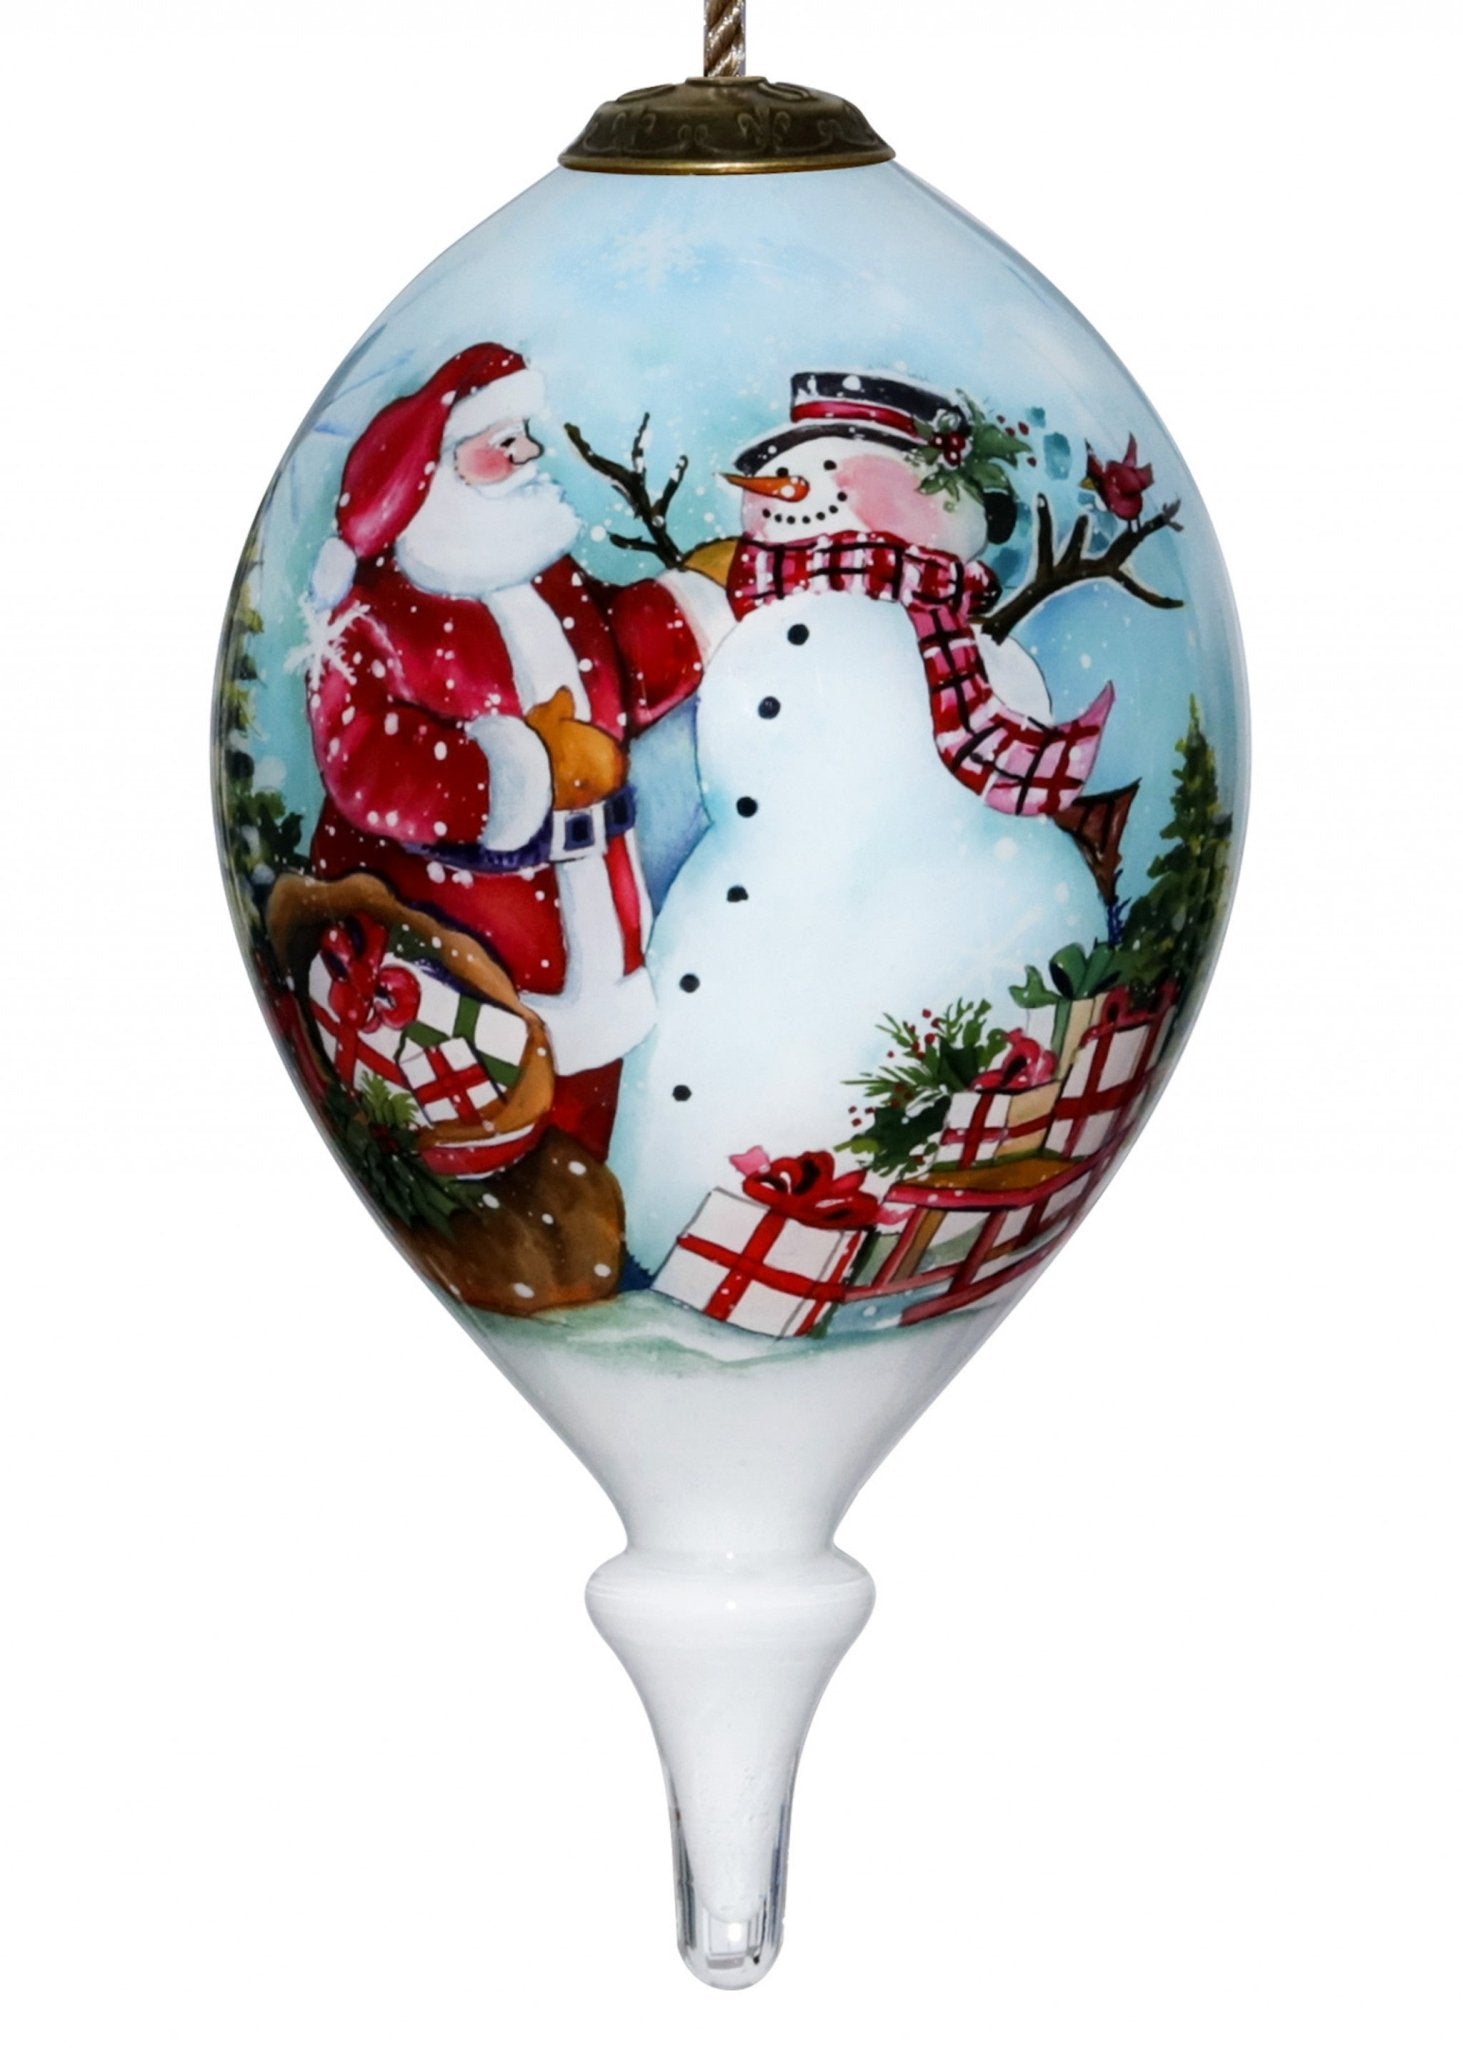 Christmas-Santa-and-Snowman-Hand-Painted-Mouth-Blown-Glass-Ornament-Christmas-Ornaments